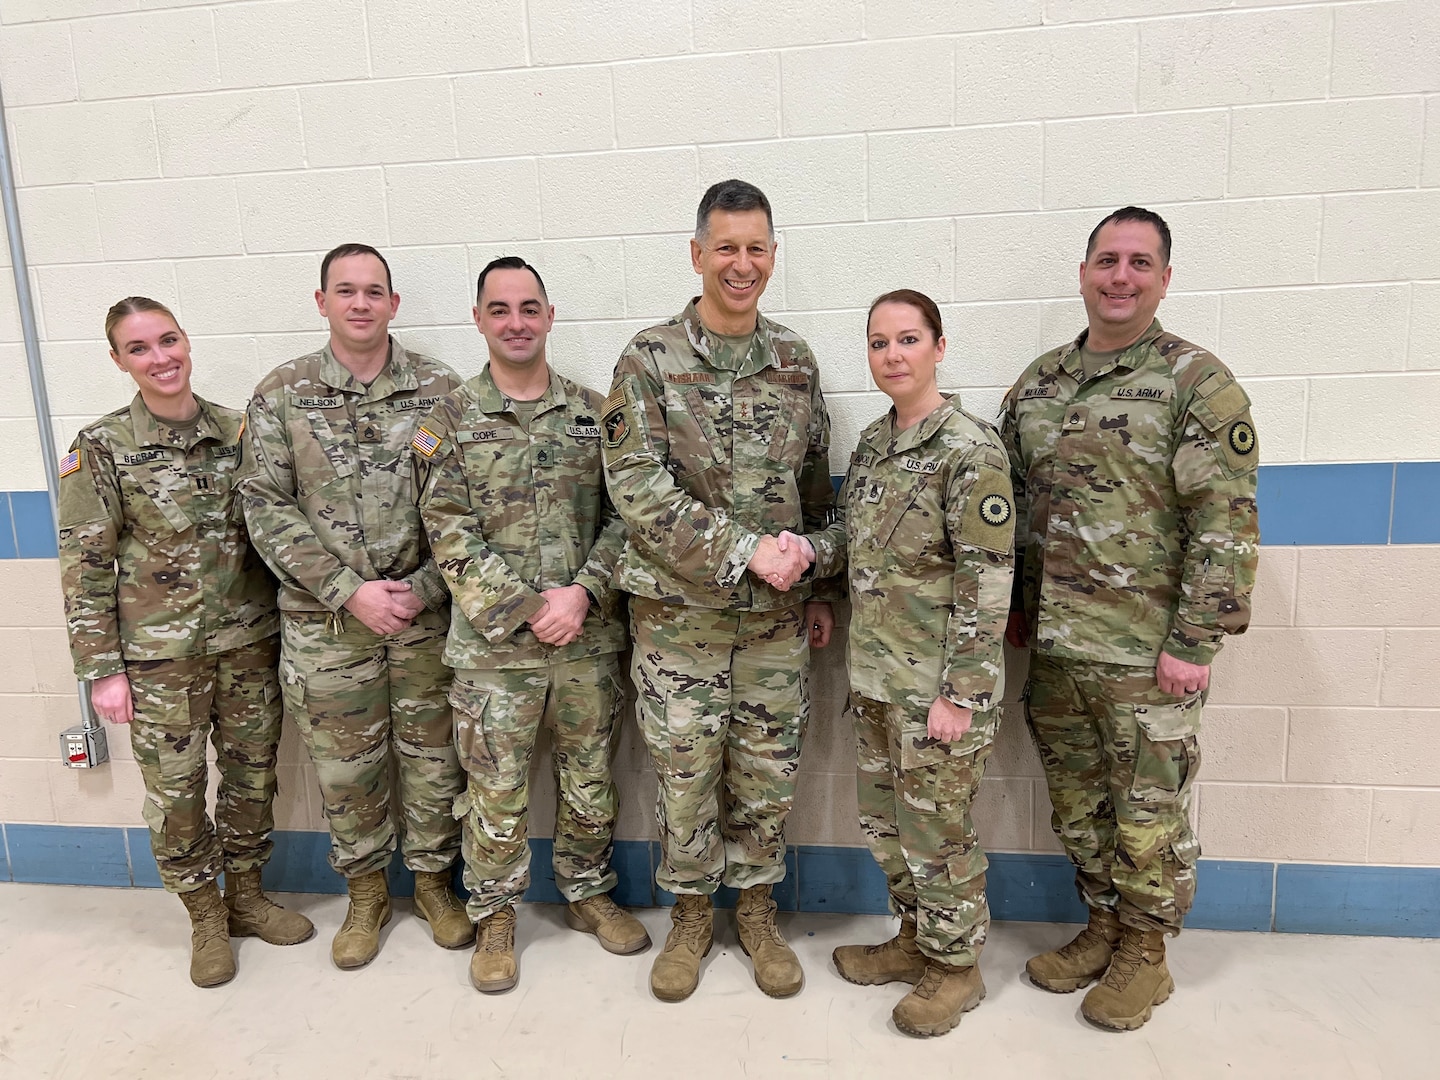 Sgt. 1st Class Tiffany Alligood is the readiness noncommissioned officer and a combat medic with the Kansas Army National Guard’s 1077th Ground Ambulance Company at the Lenexa armory.